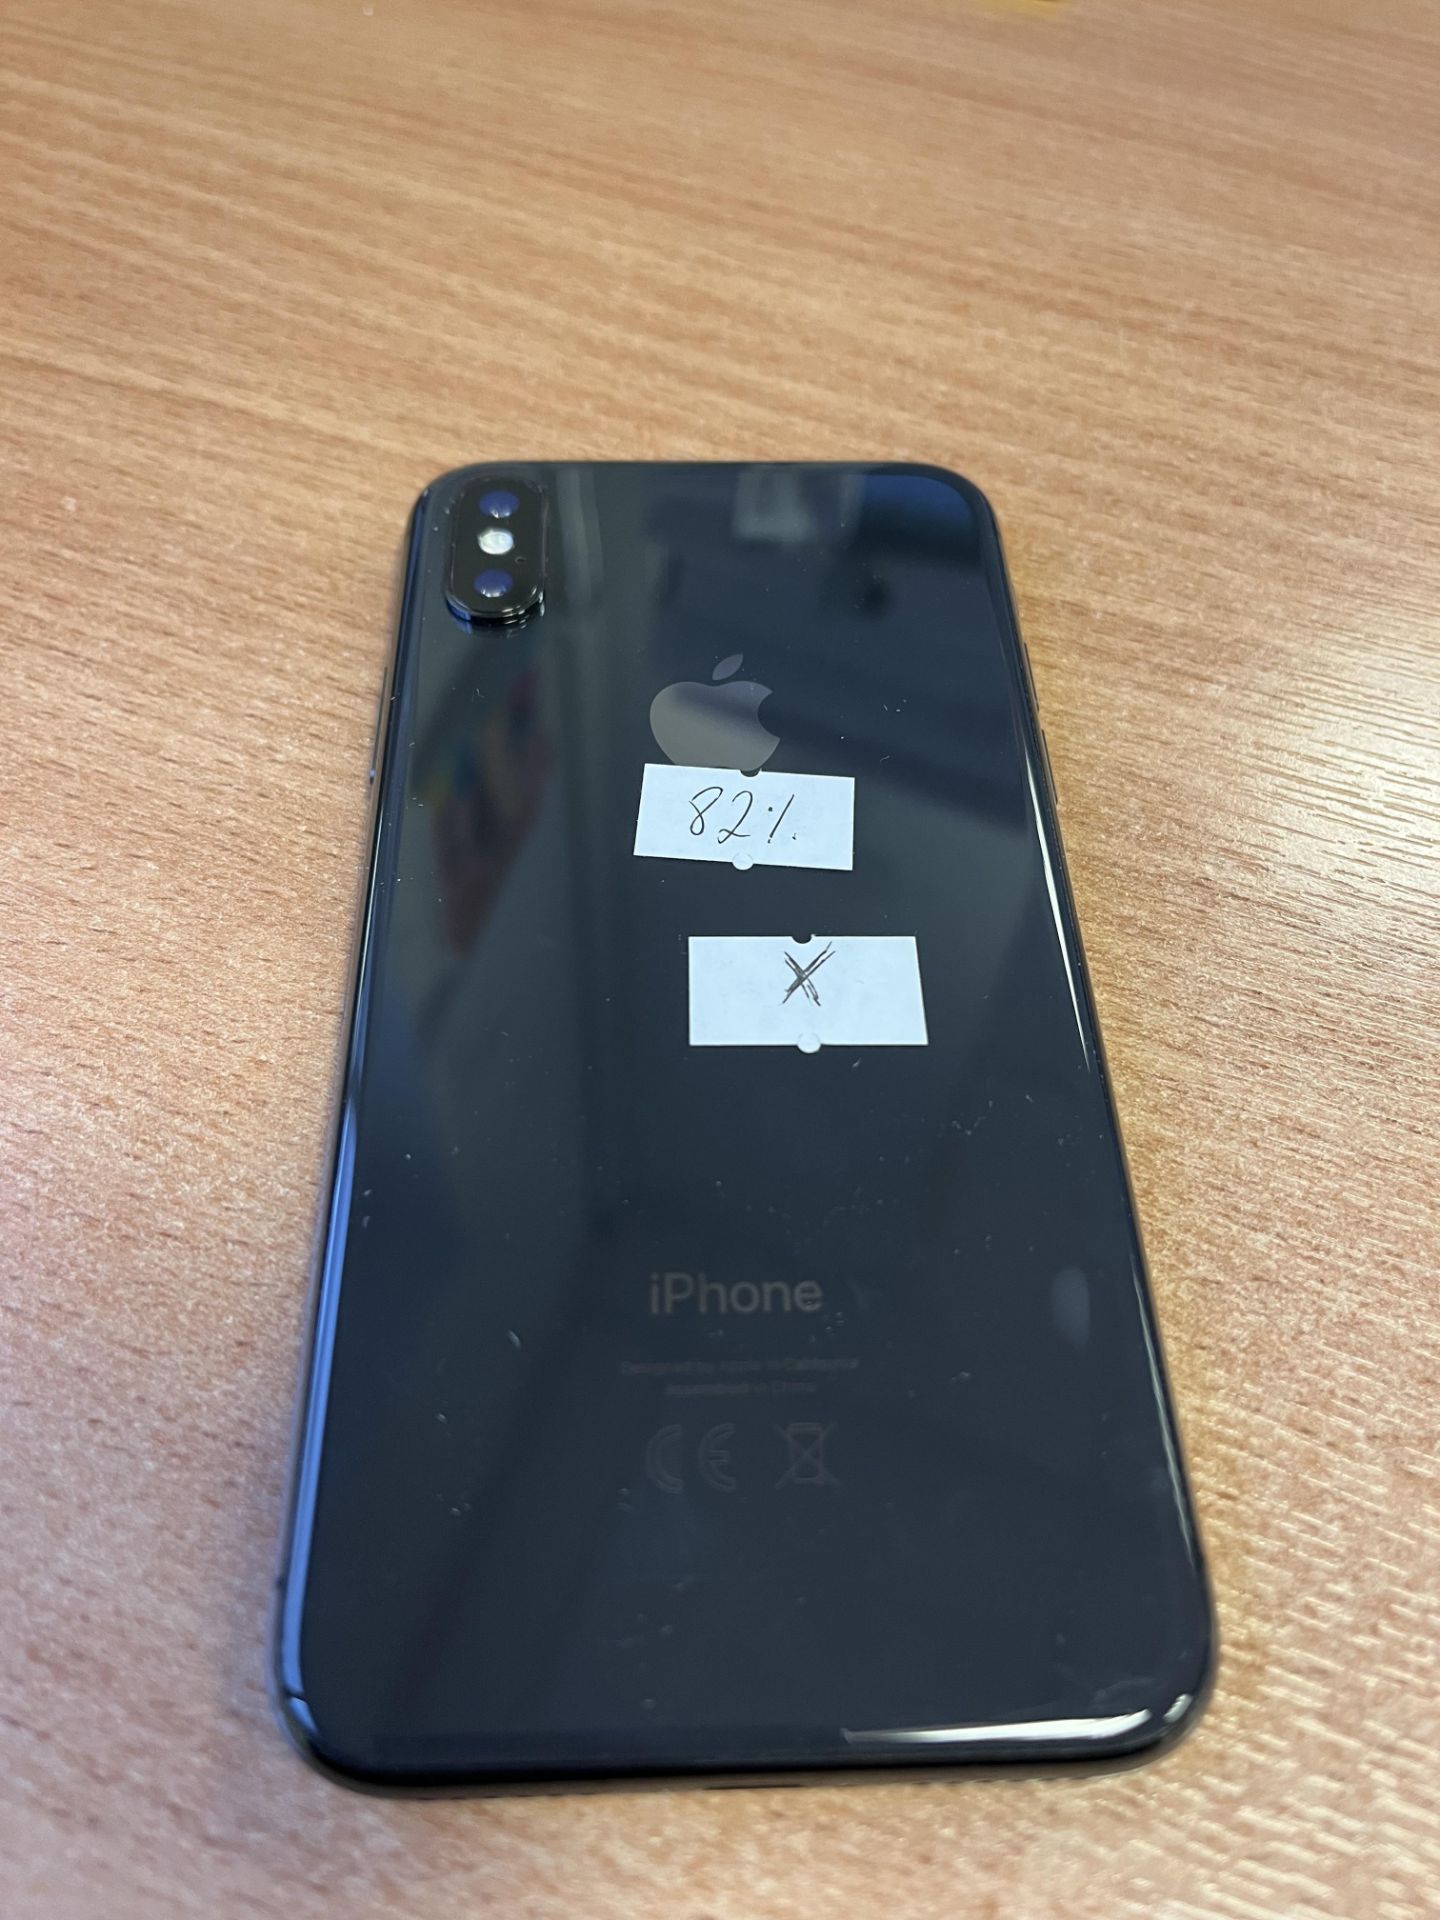 2x iPhone X's. No chargers, unknown condition. - Image 3 of 4